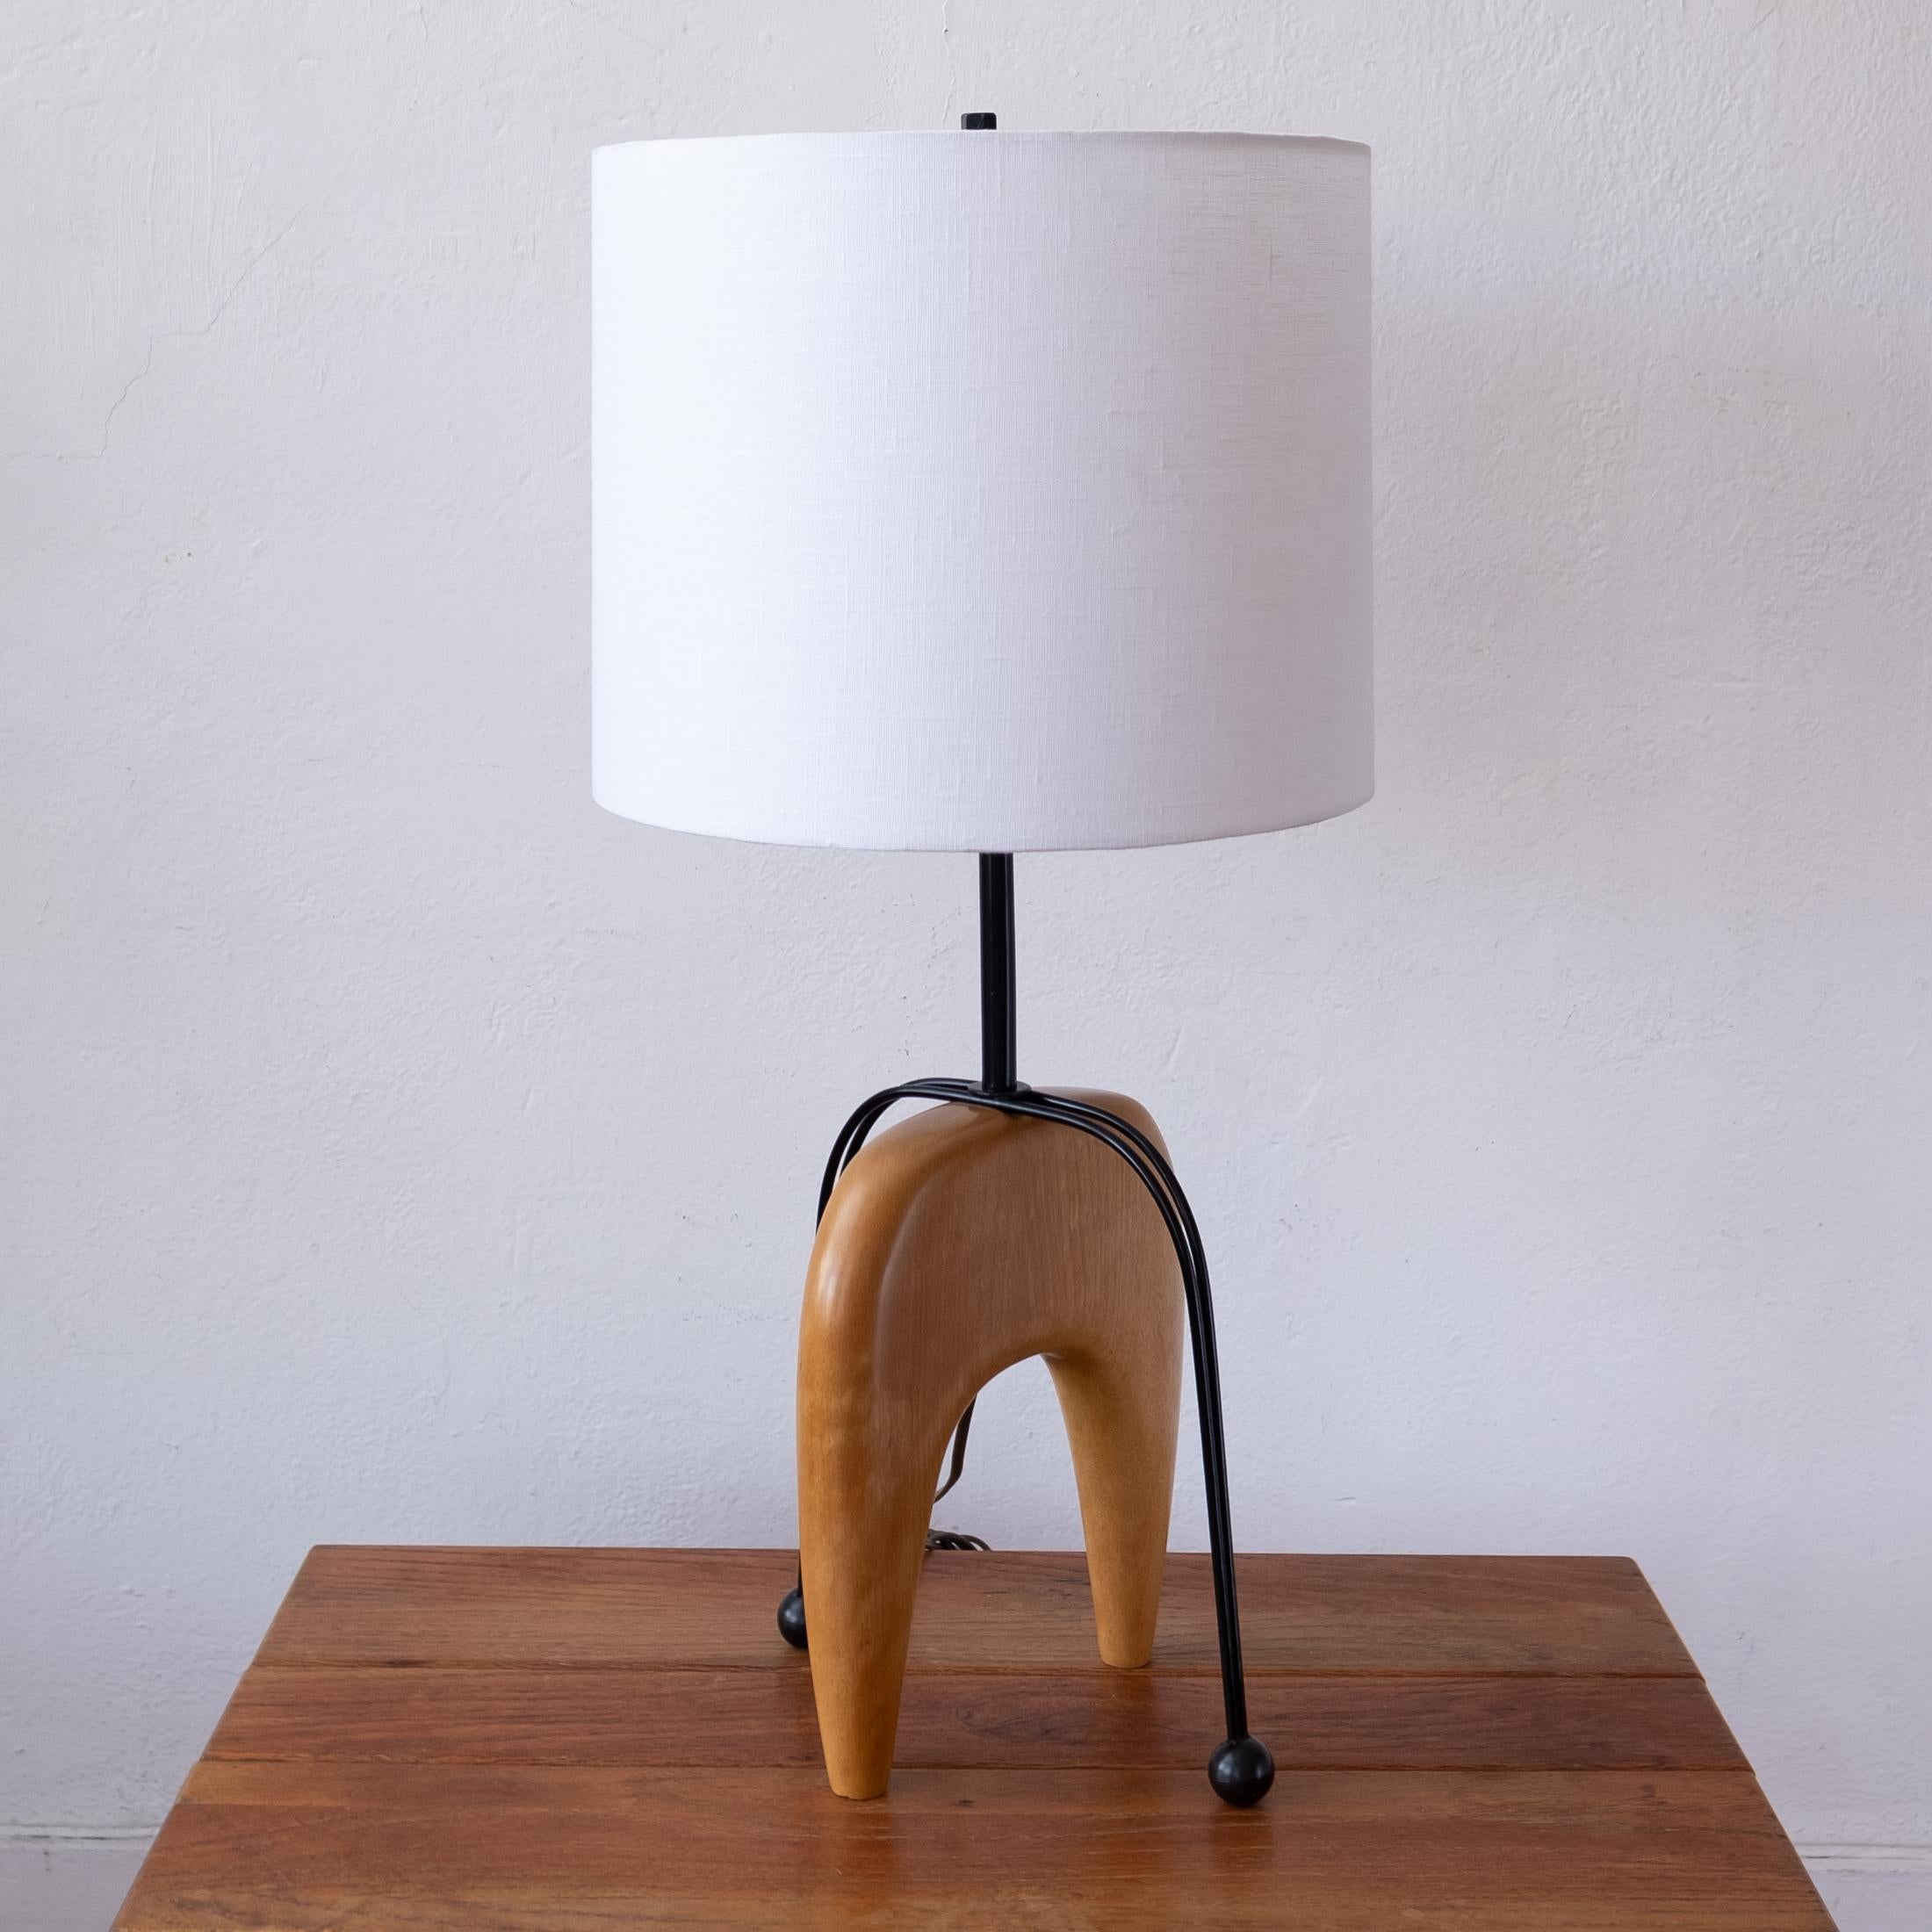 Early 1950s wood and metal table table lamp. Formed sculptural wood base with an arched metal counterbalance. 

Custom linen shade (12